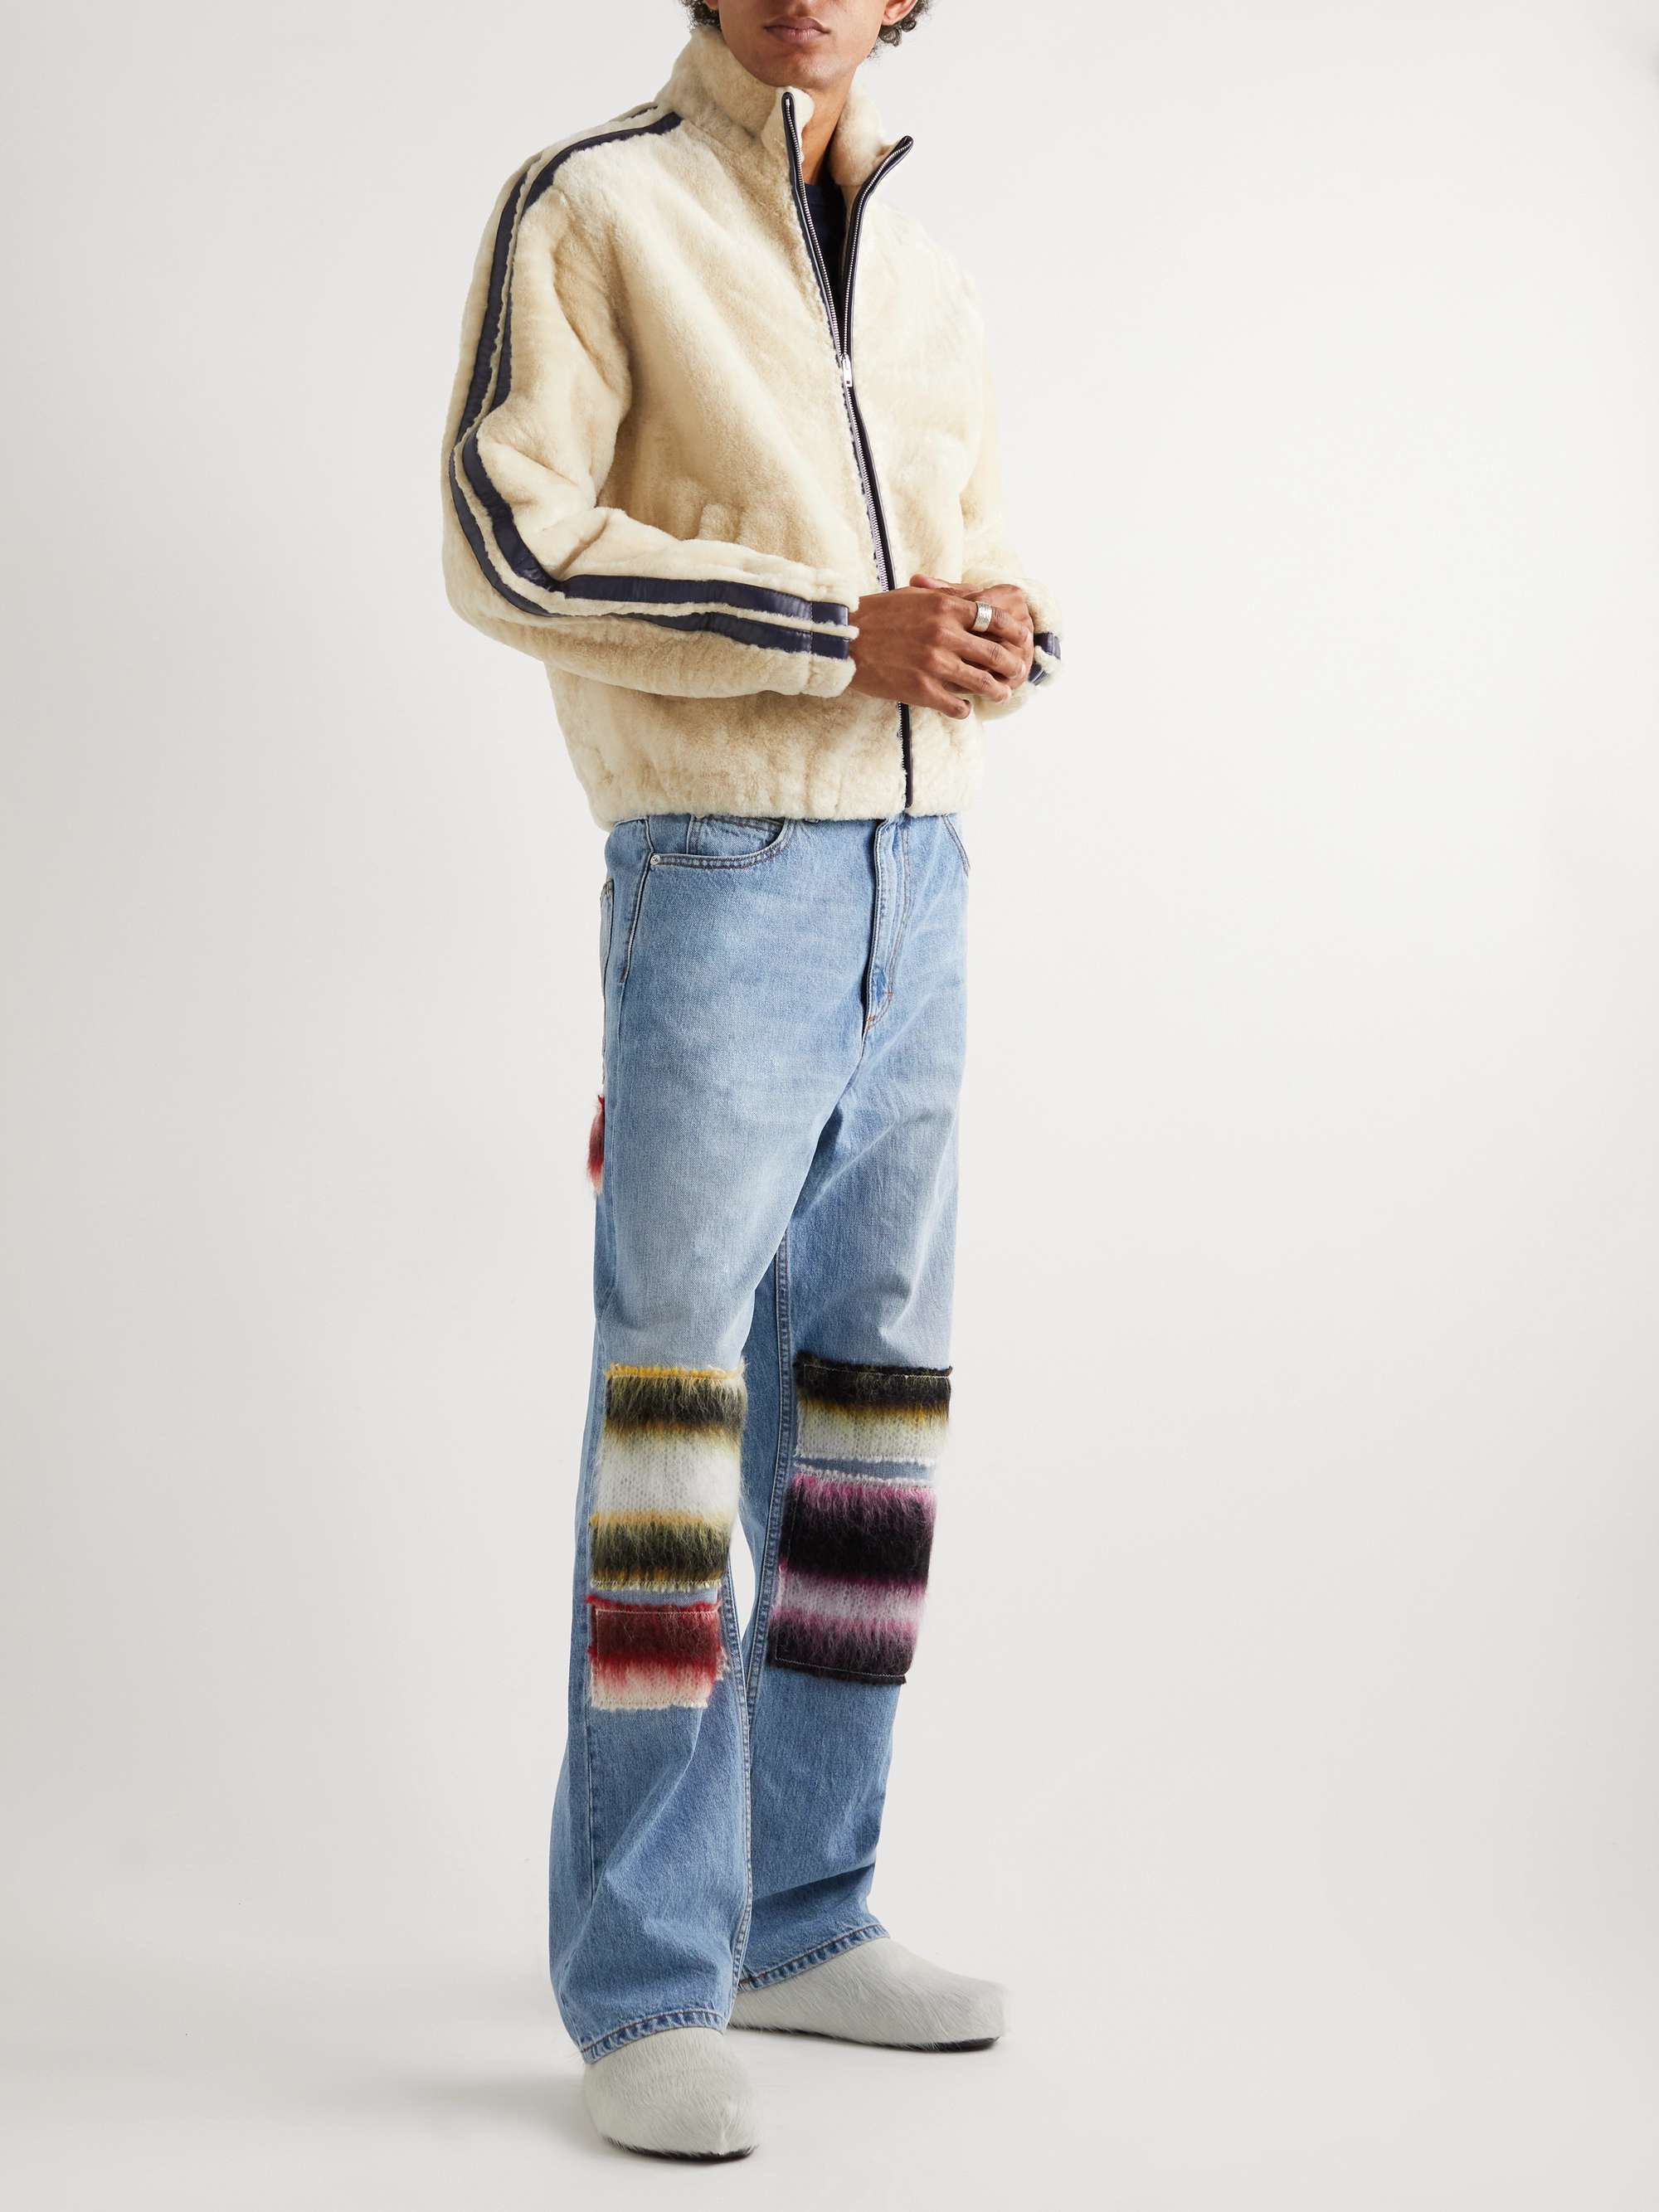 MARNI Striped Leather-Trimmed Shearling Jacket